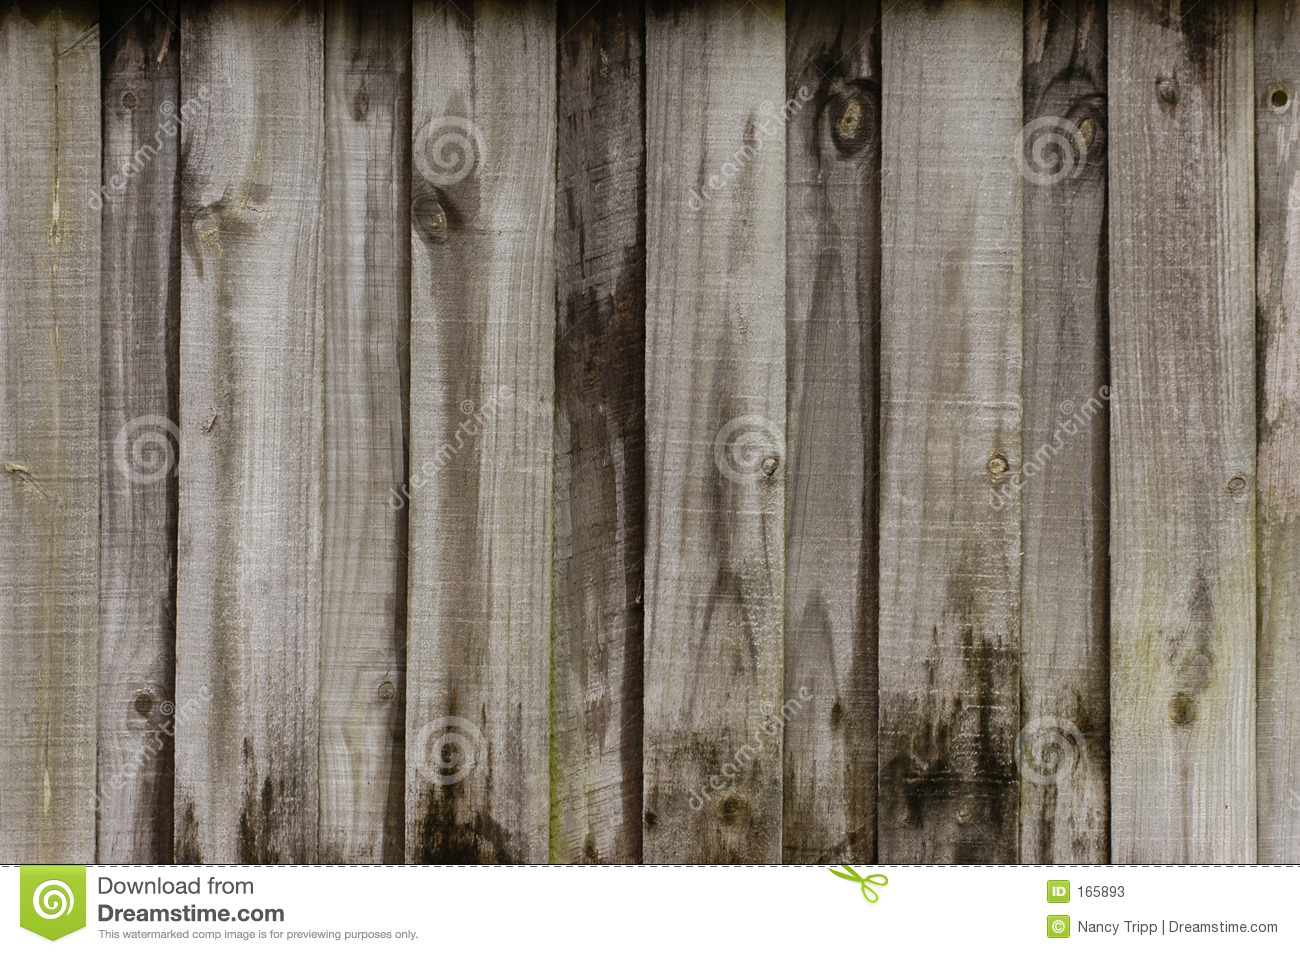 Rustic Wooden Fence Background Stock Photos   Image  165893